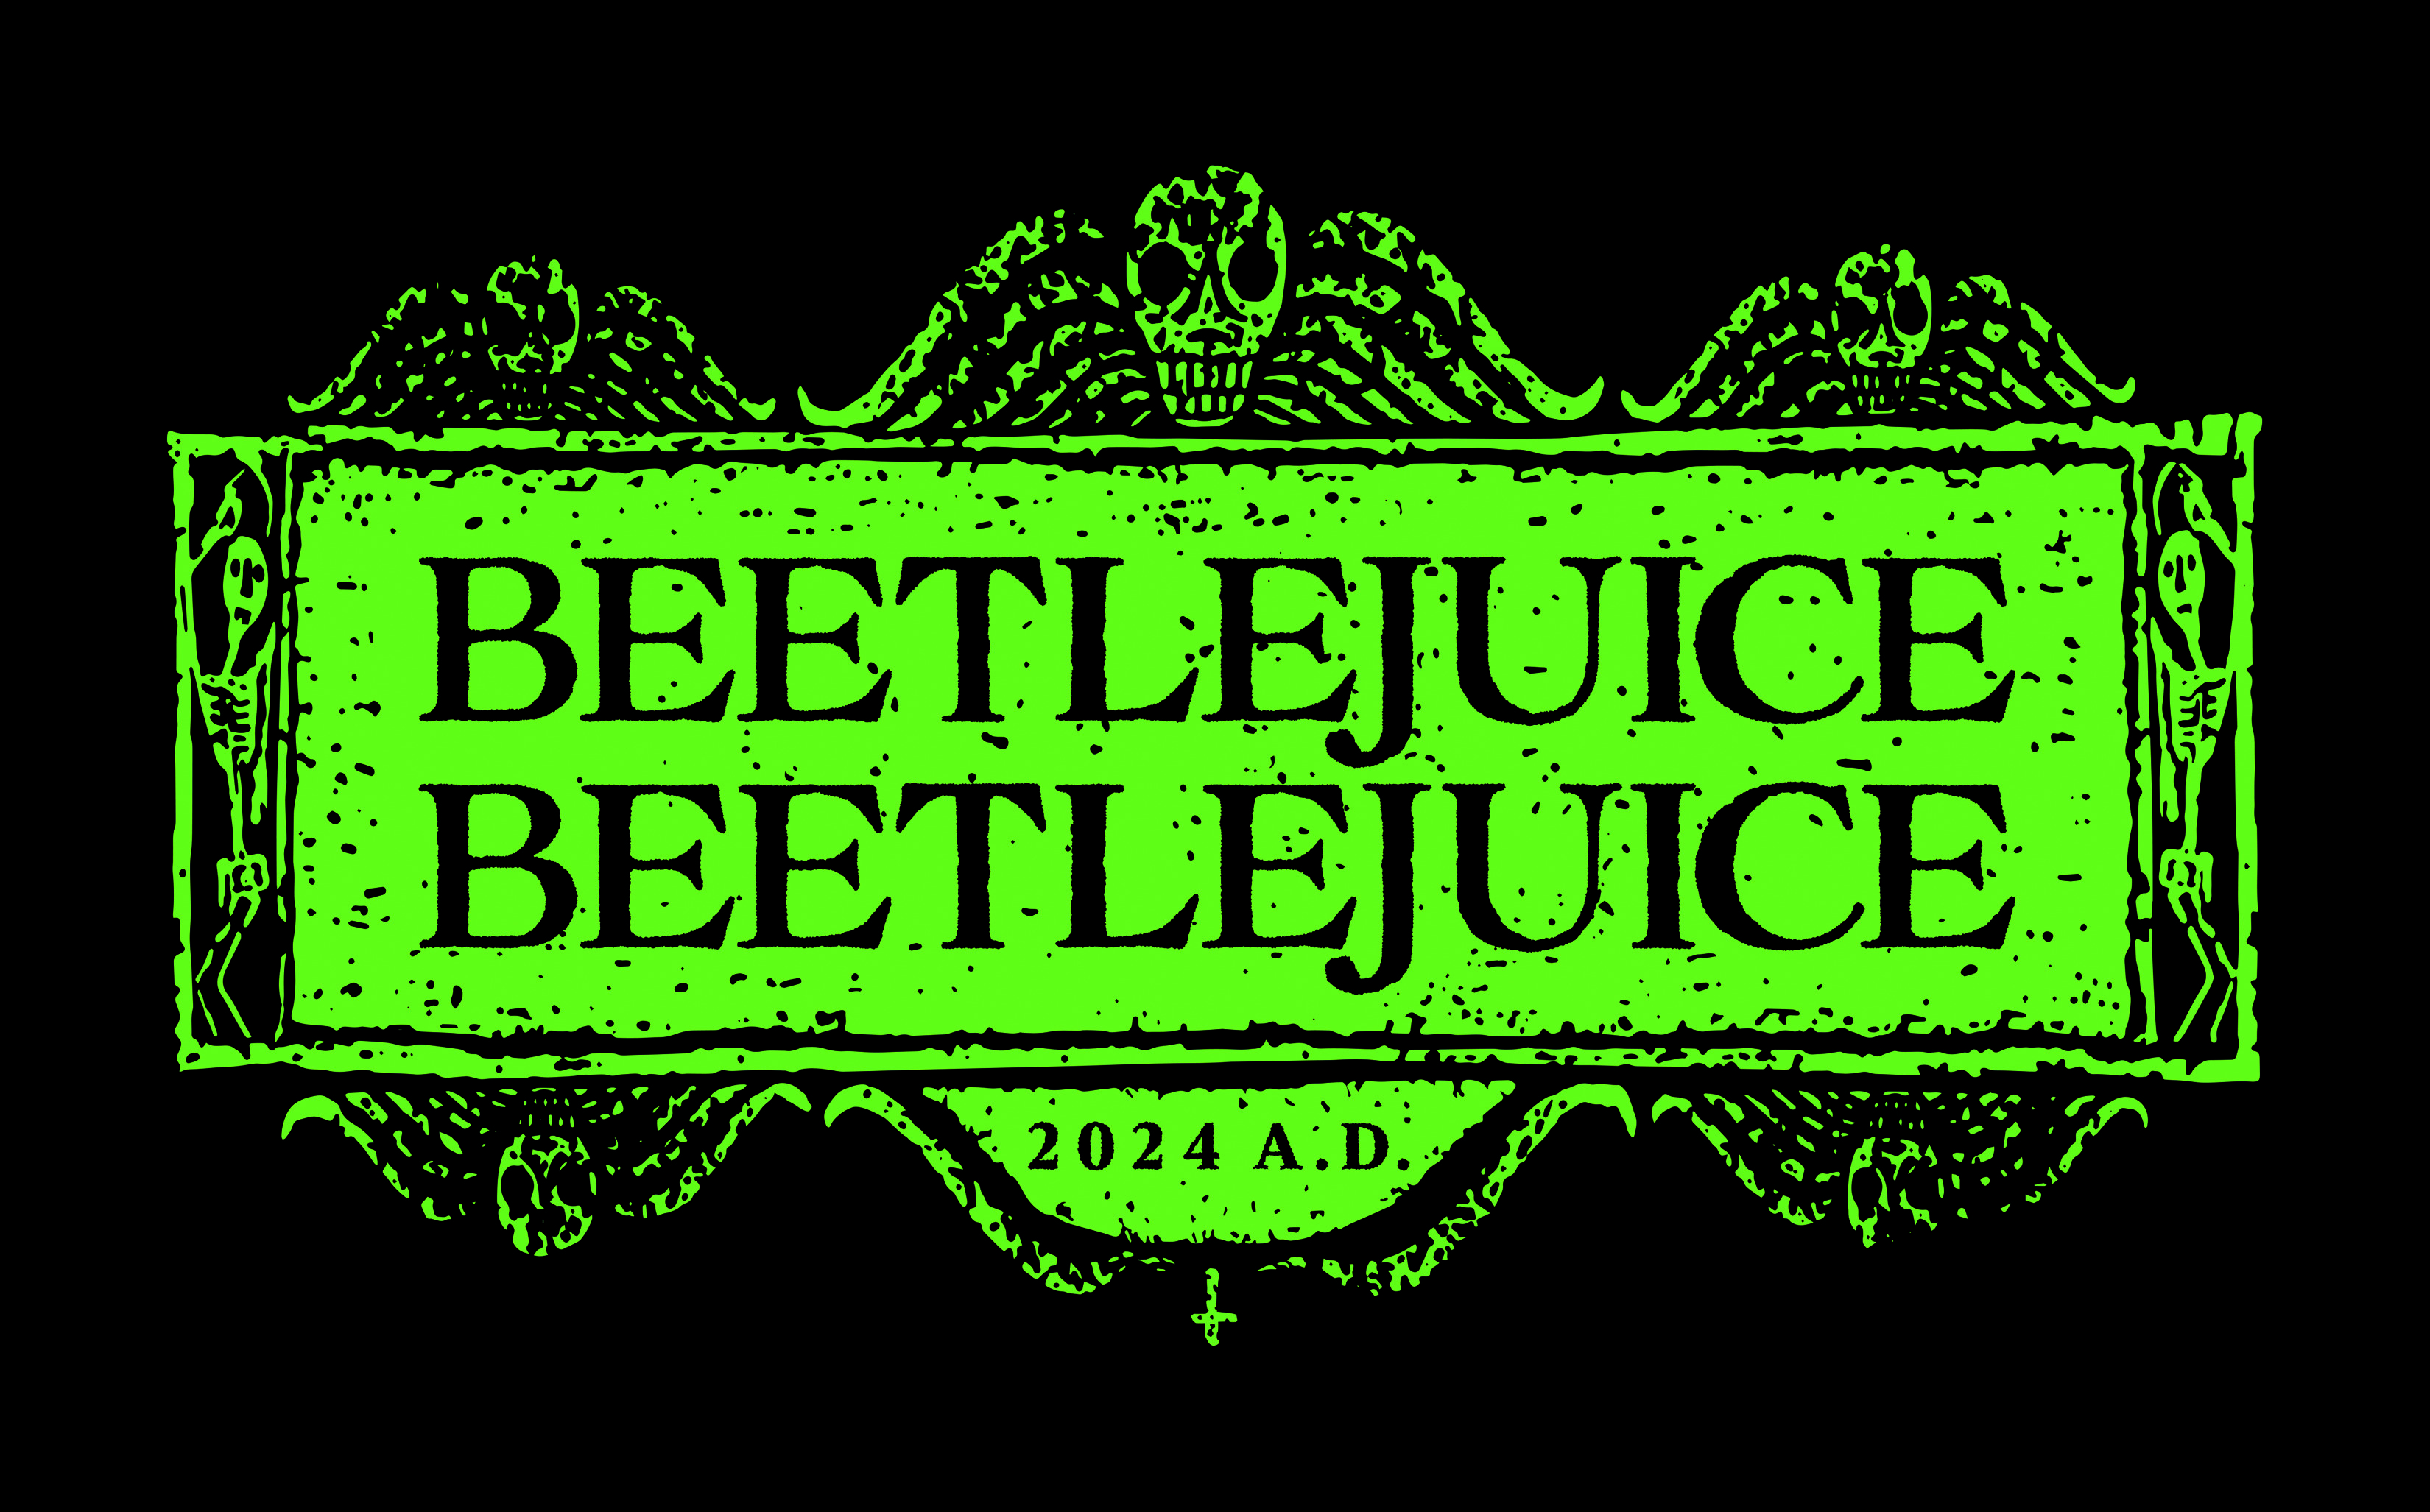 Text &quot;BEETLEJUICE BEETLEJUICE BEETLEJUICE&quot; with the year &quot;2024 A.D.&quot; underneath, within an ornate frame